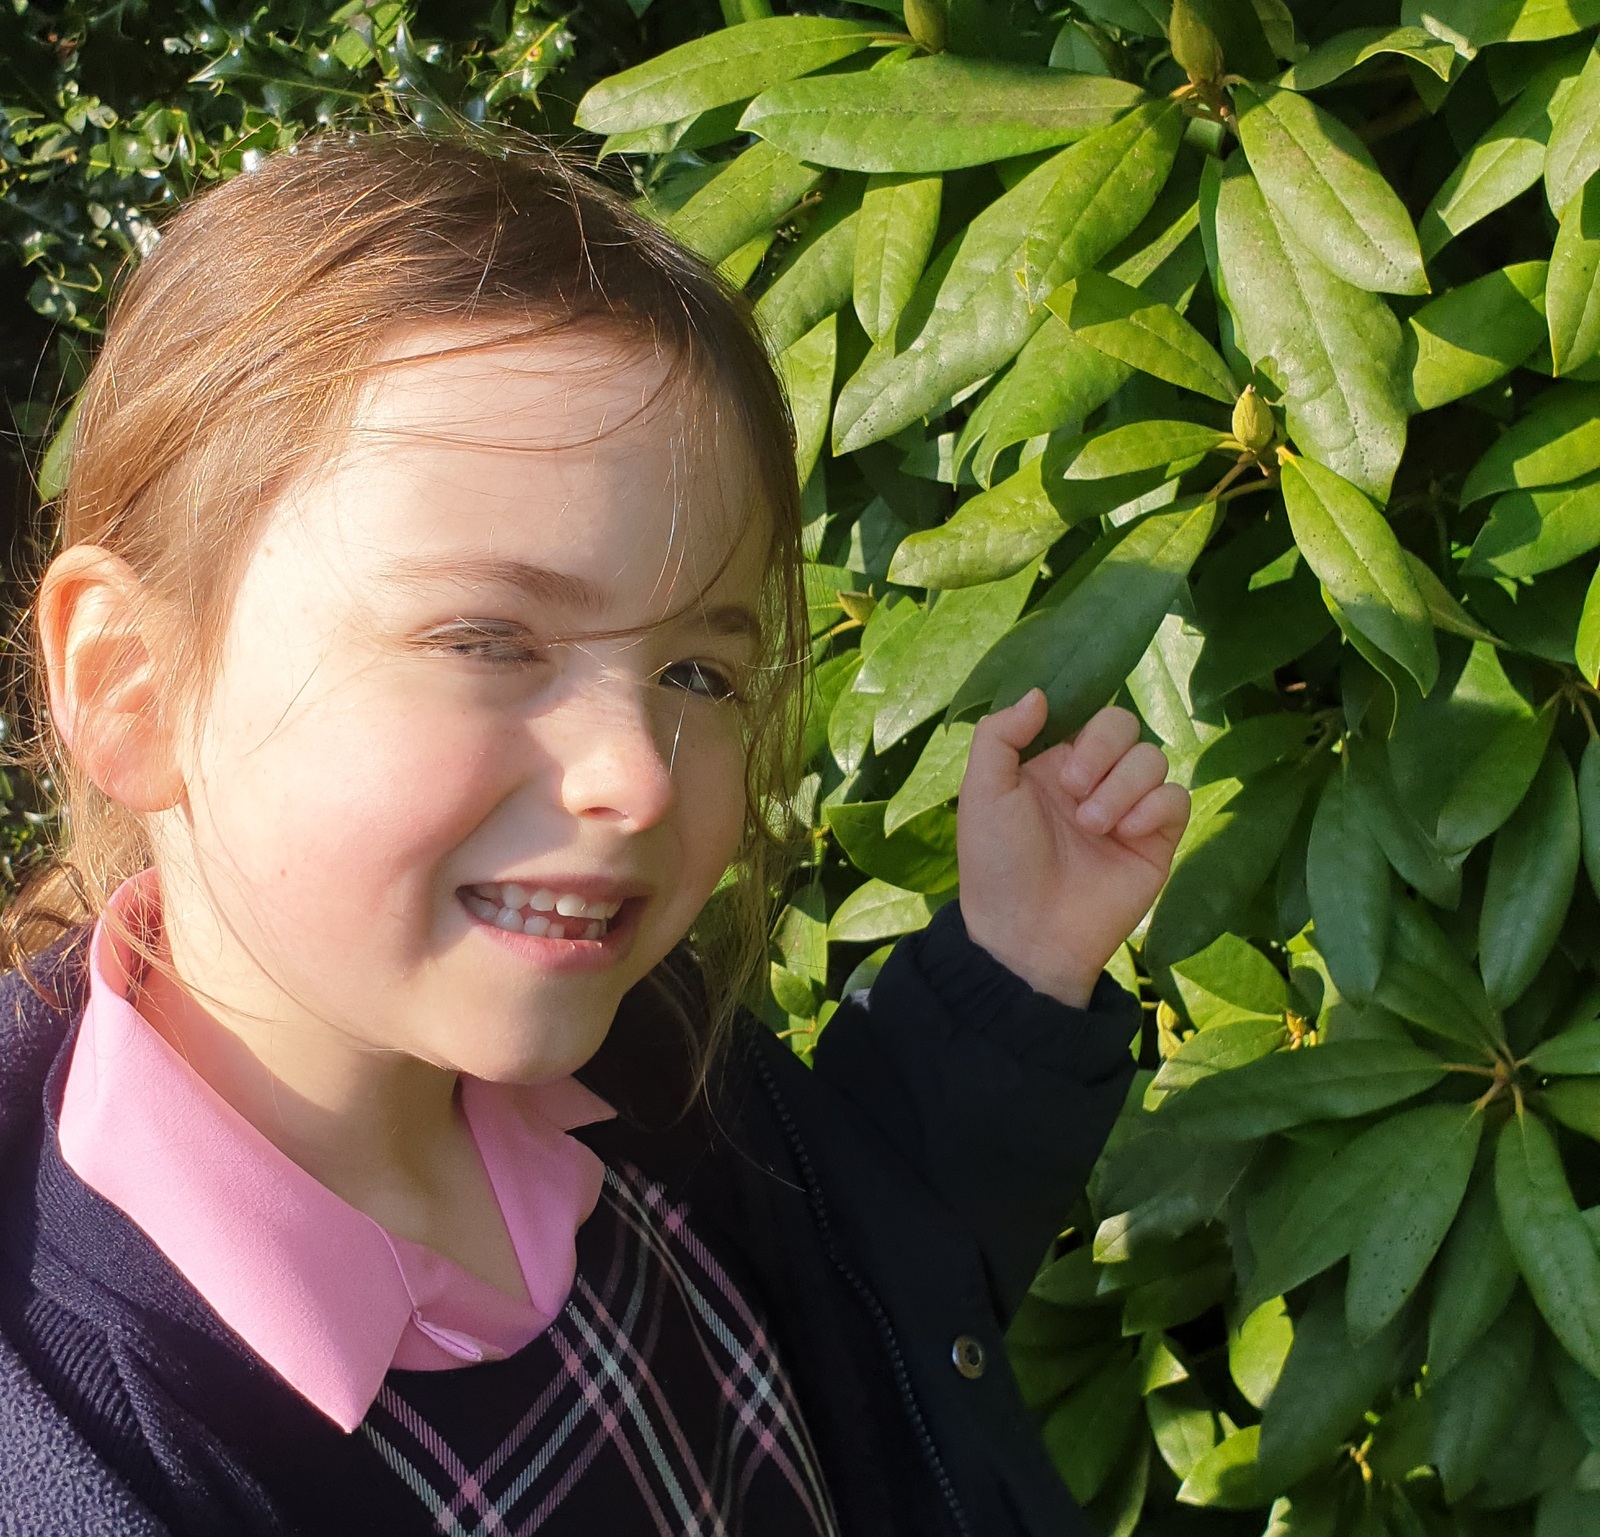 'Mindfulness' alert - The benefit of having plants in our school